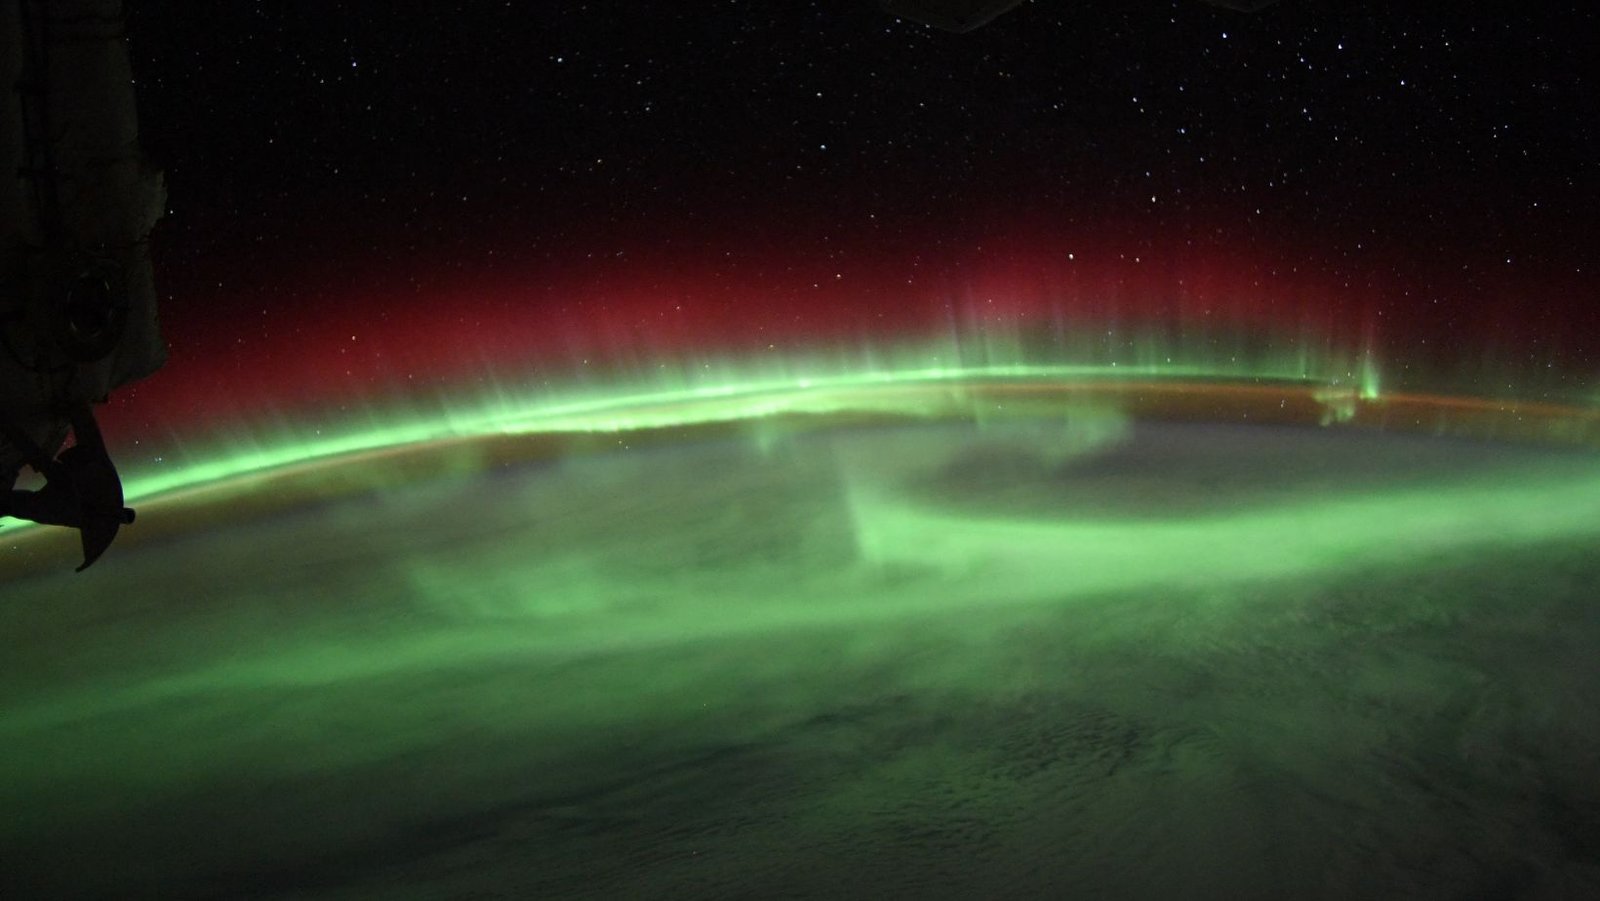 From space, an astronaut notices a bright aurora storm